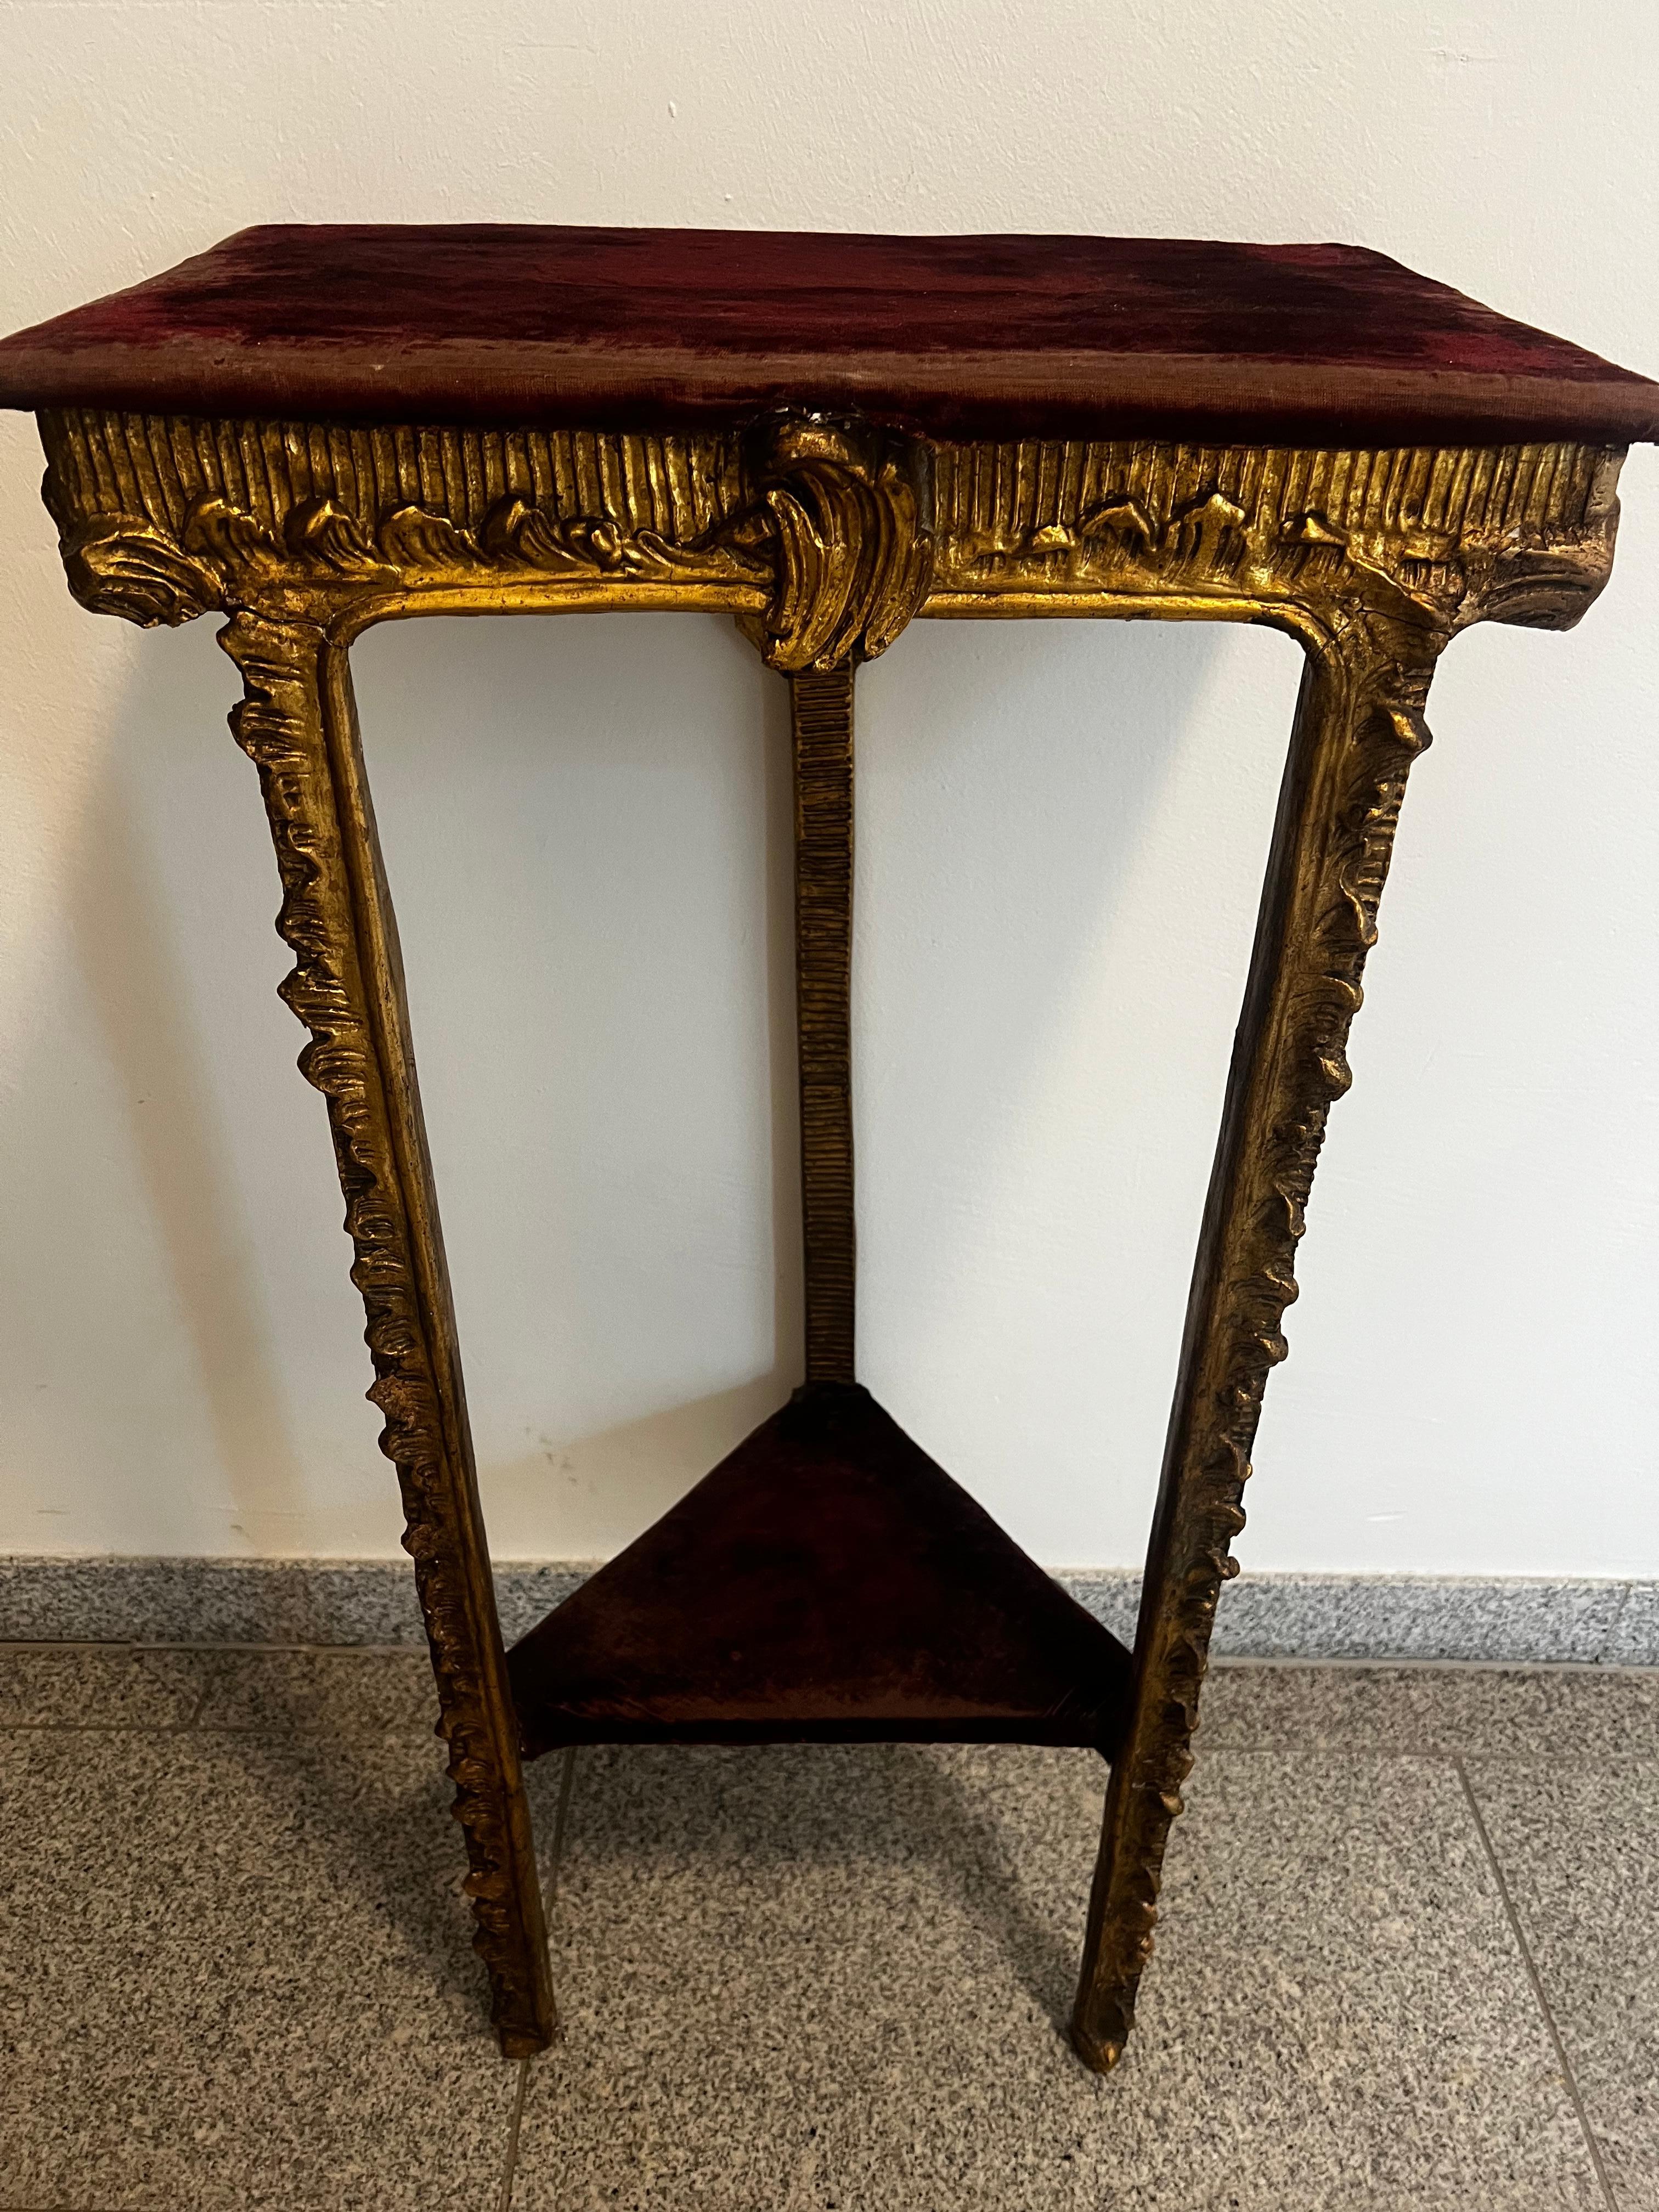 Rare Antique Venetian 18th Century Gold Gilded Console Table In Good Condition For Sale In Doha, QA